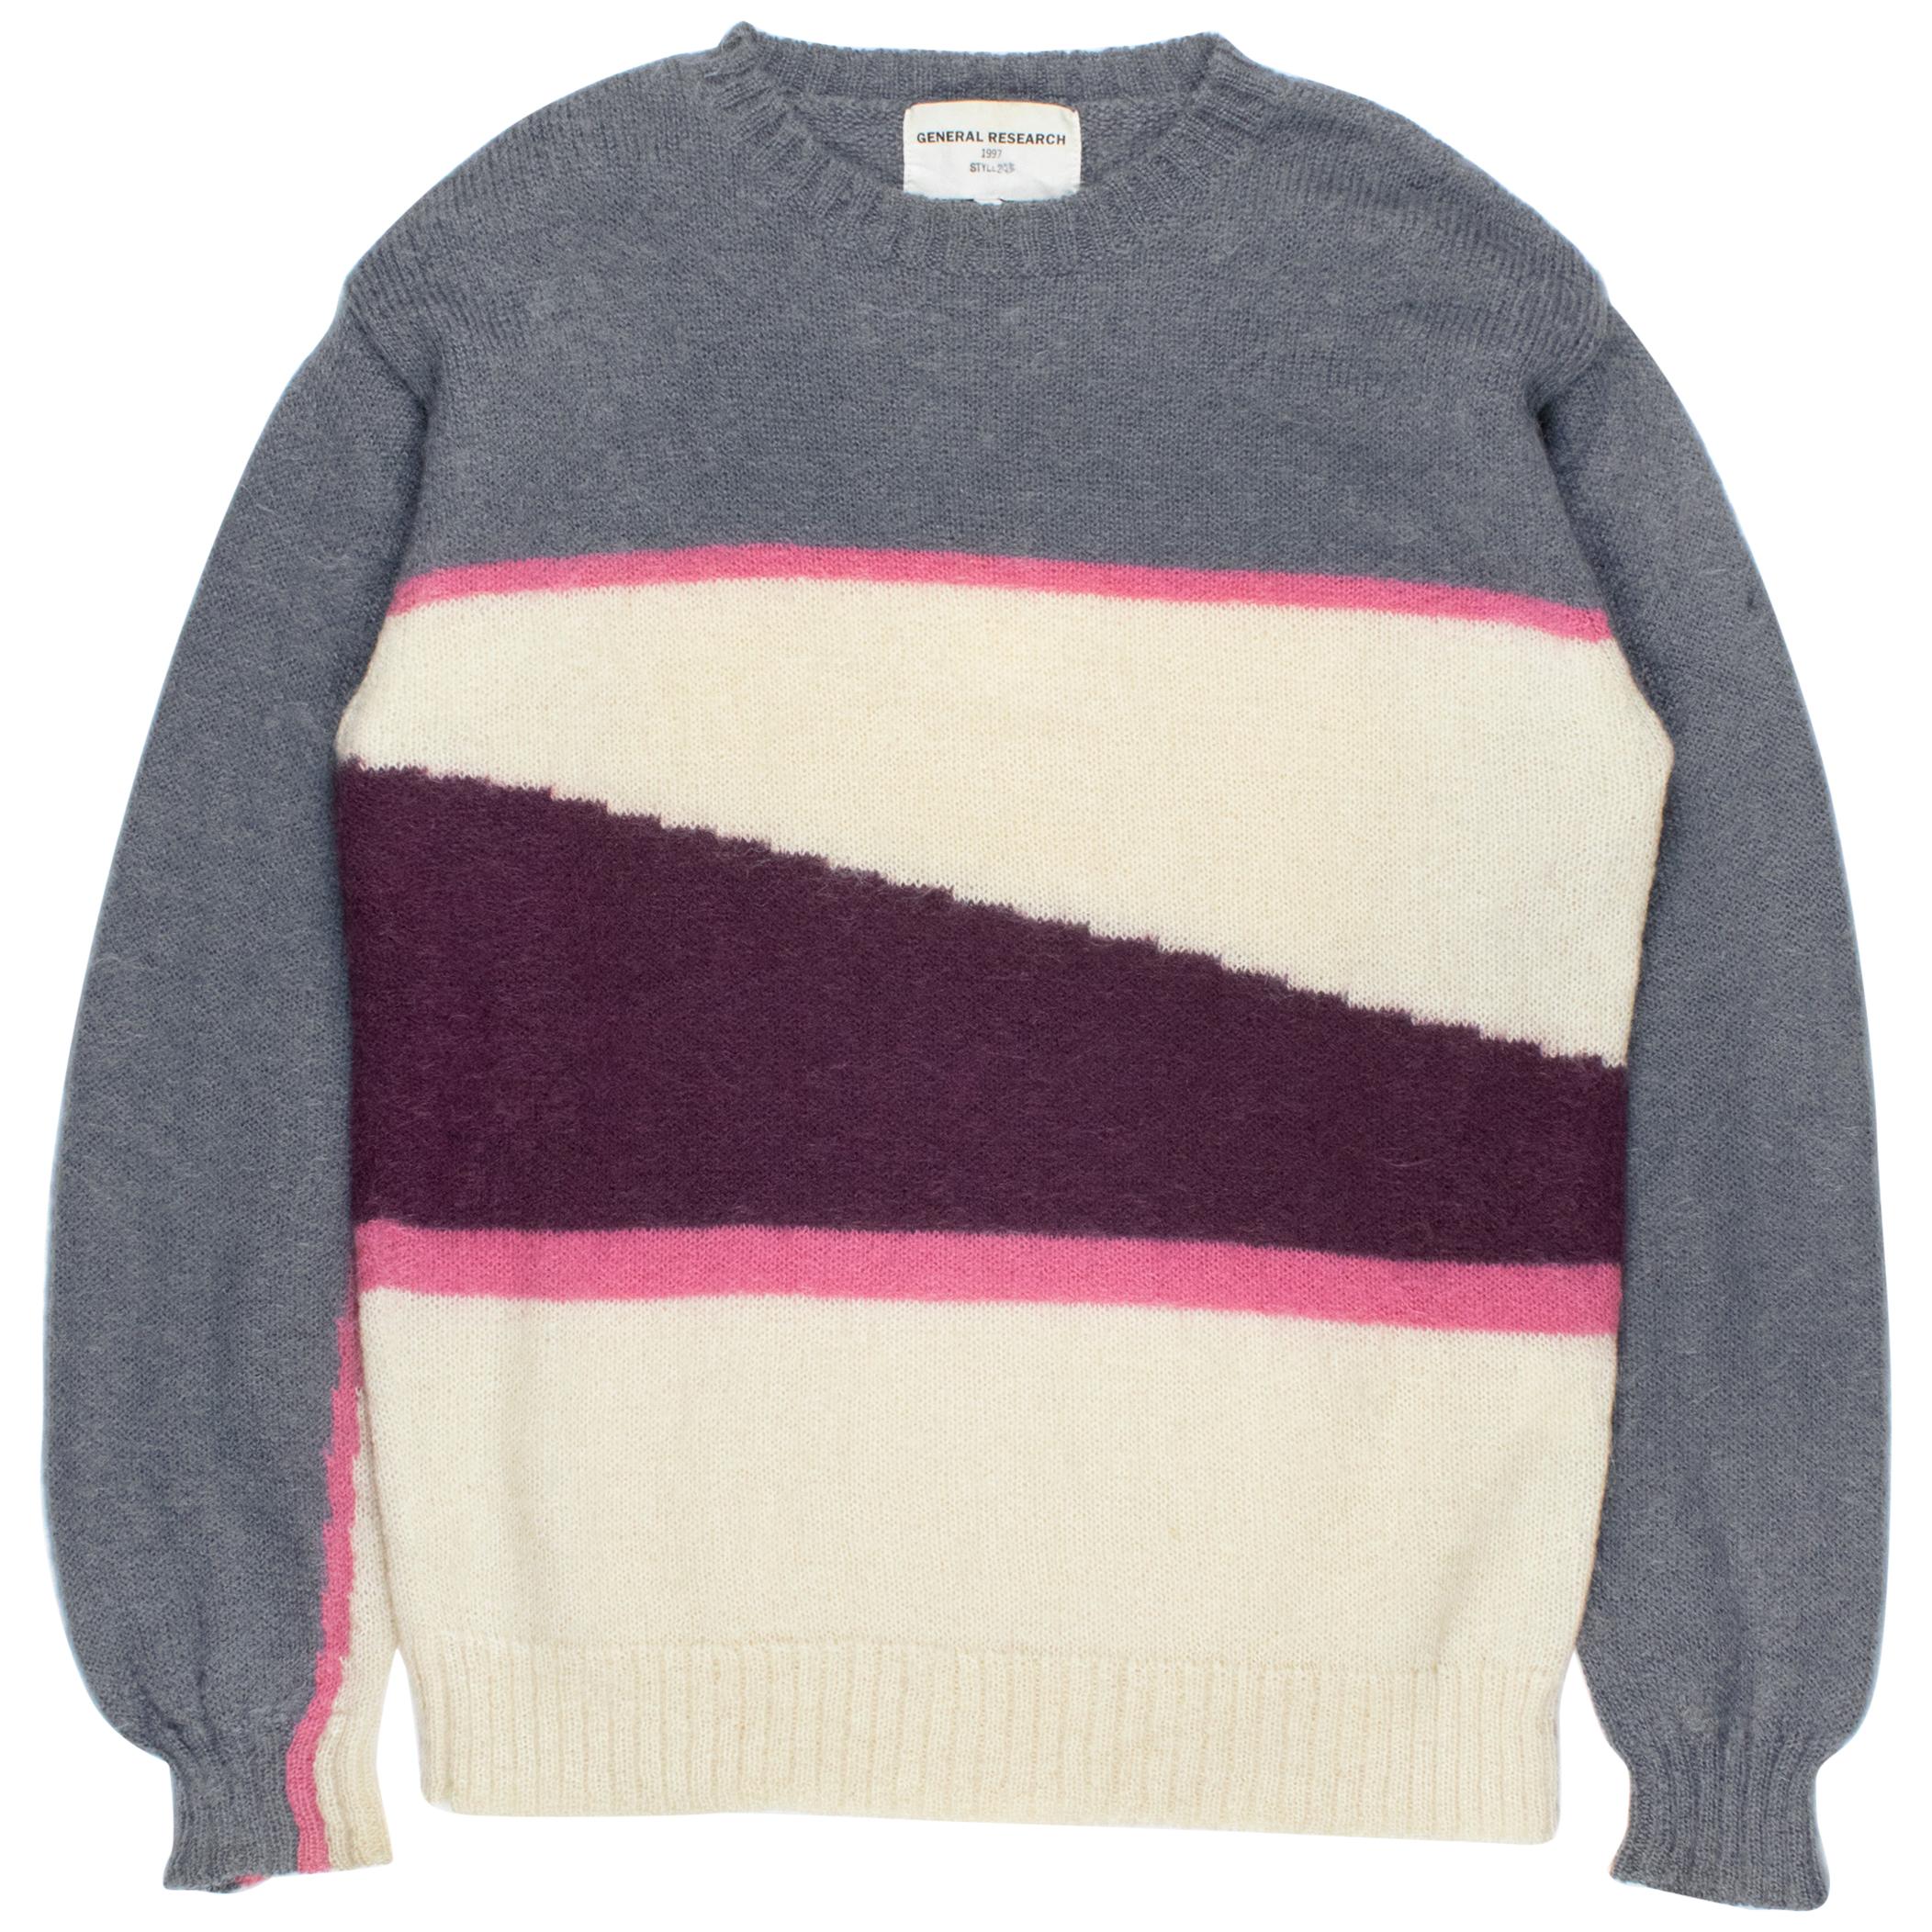 General Research 1997 Mohair Sweater